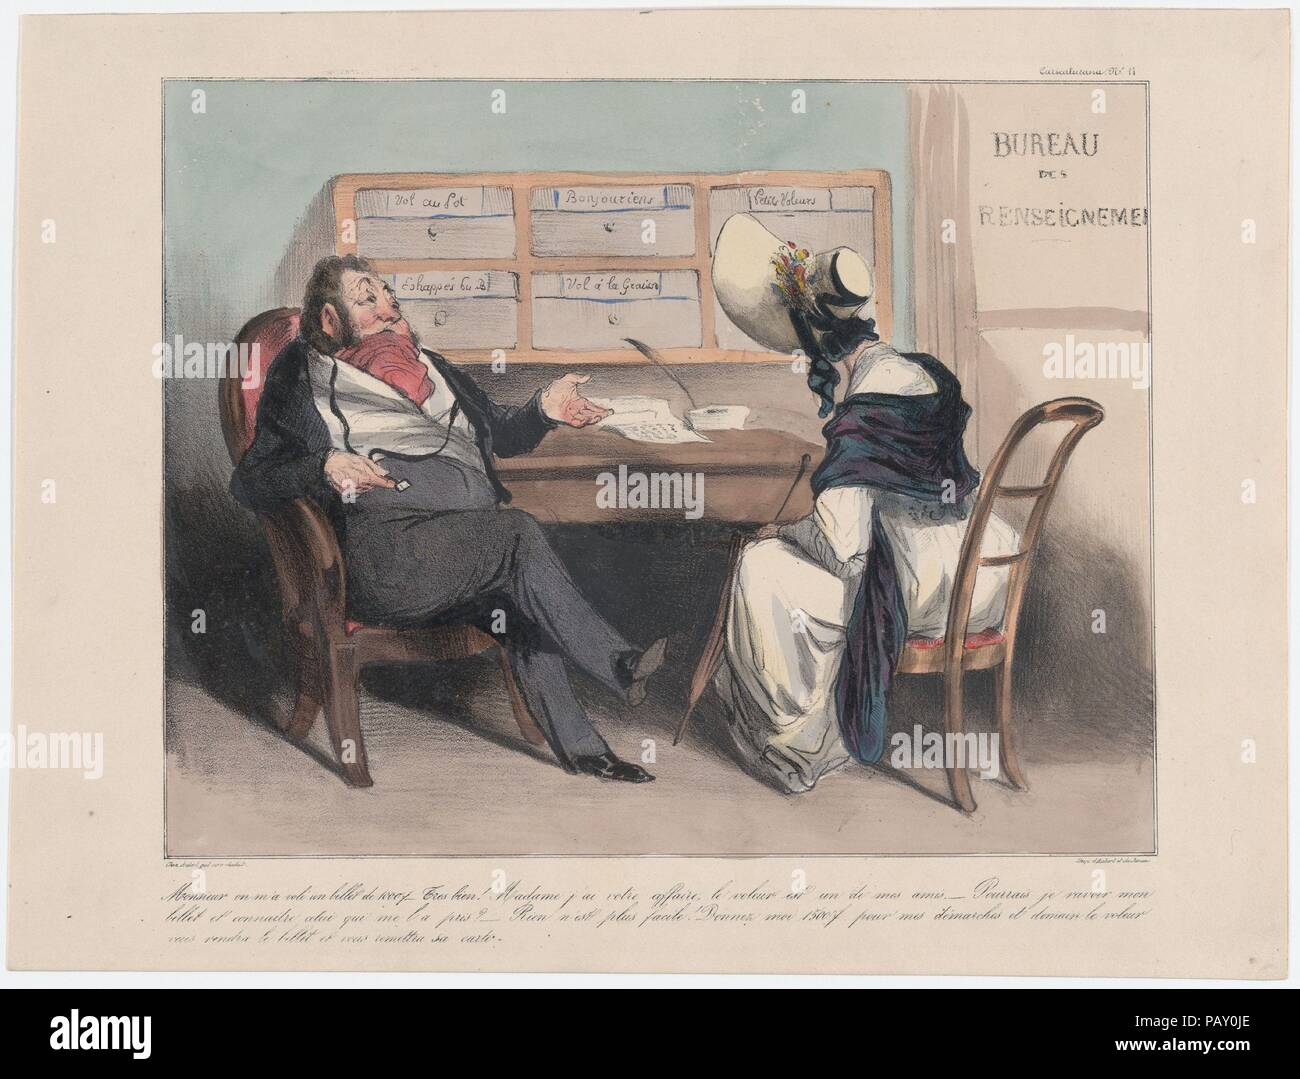 Plate 11: Someone stole a thousand franc note from me, Monsieur..., from 'Caricaturana,' published in Les Robert Macaires. Artist: Honoré Daumier (French, Marseilles 1808-1879 Valmondois). Author: Charles Philipon (French, Lyons 1800-1862 Paris). Dimensions: Image: 8 1/8 × 10 3/8 in. (20.6 × 26.3 cm)  Sheet: 10 3/16 × 13 7/16 in. (25.9 × 34.1 cm). Printer: Aubert et Cie; Junca. Publisher: Aubert et Cie. Series/Portfolio: 'Caricaturana'. Date: 1838.  - Someone stole a thousand franc note from me, Monsieur.   - Very well! I have your case in hand, Madame. The thief is one of my friends.   - Then Stock Photo